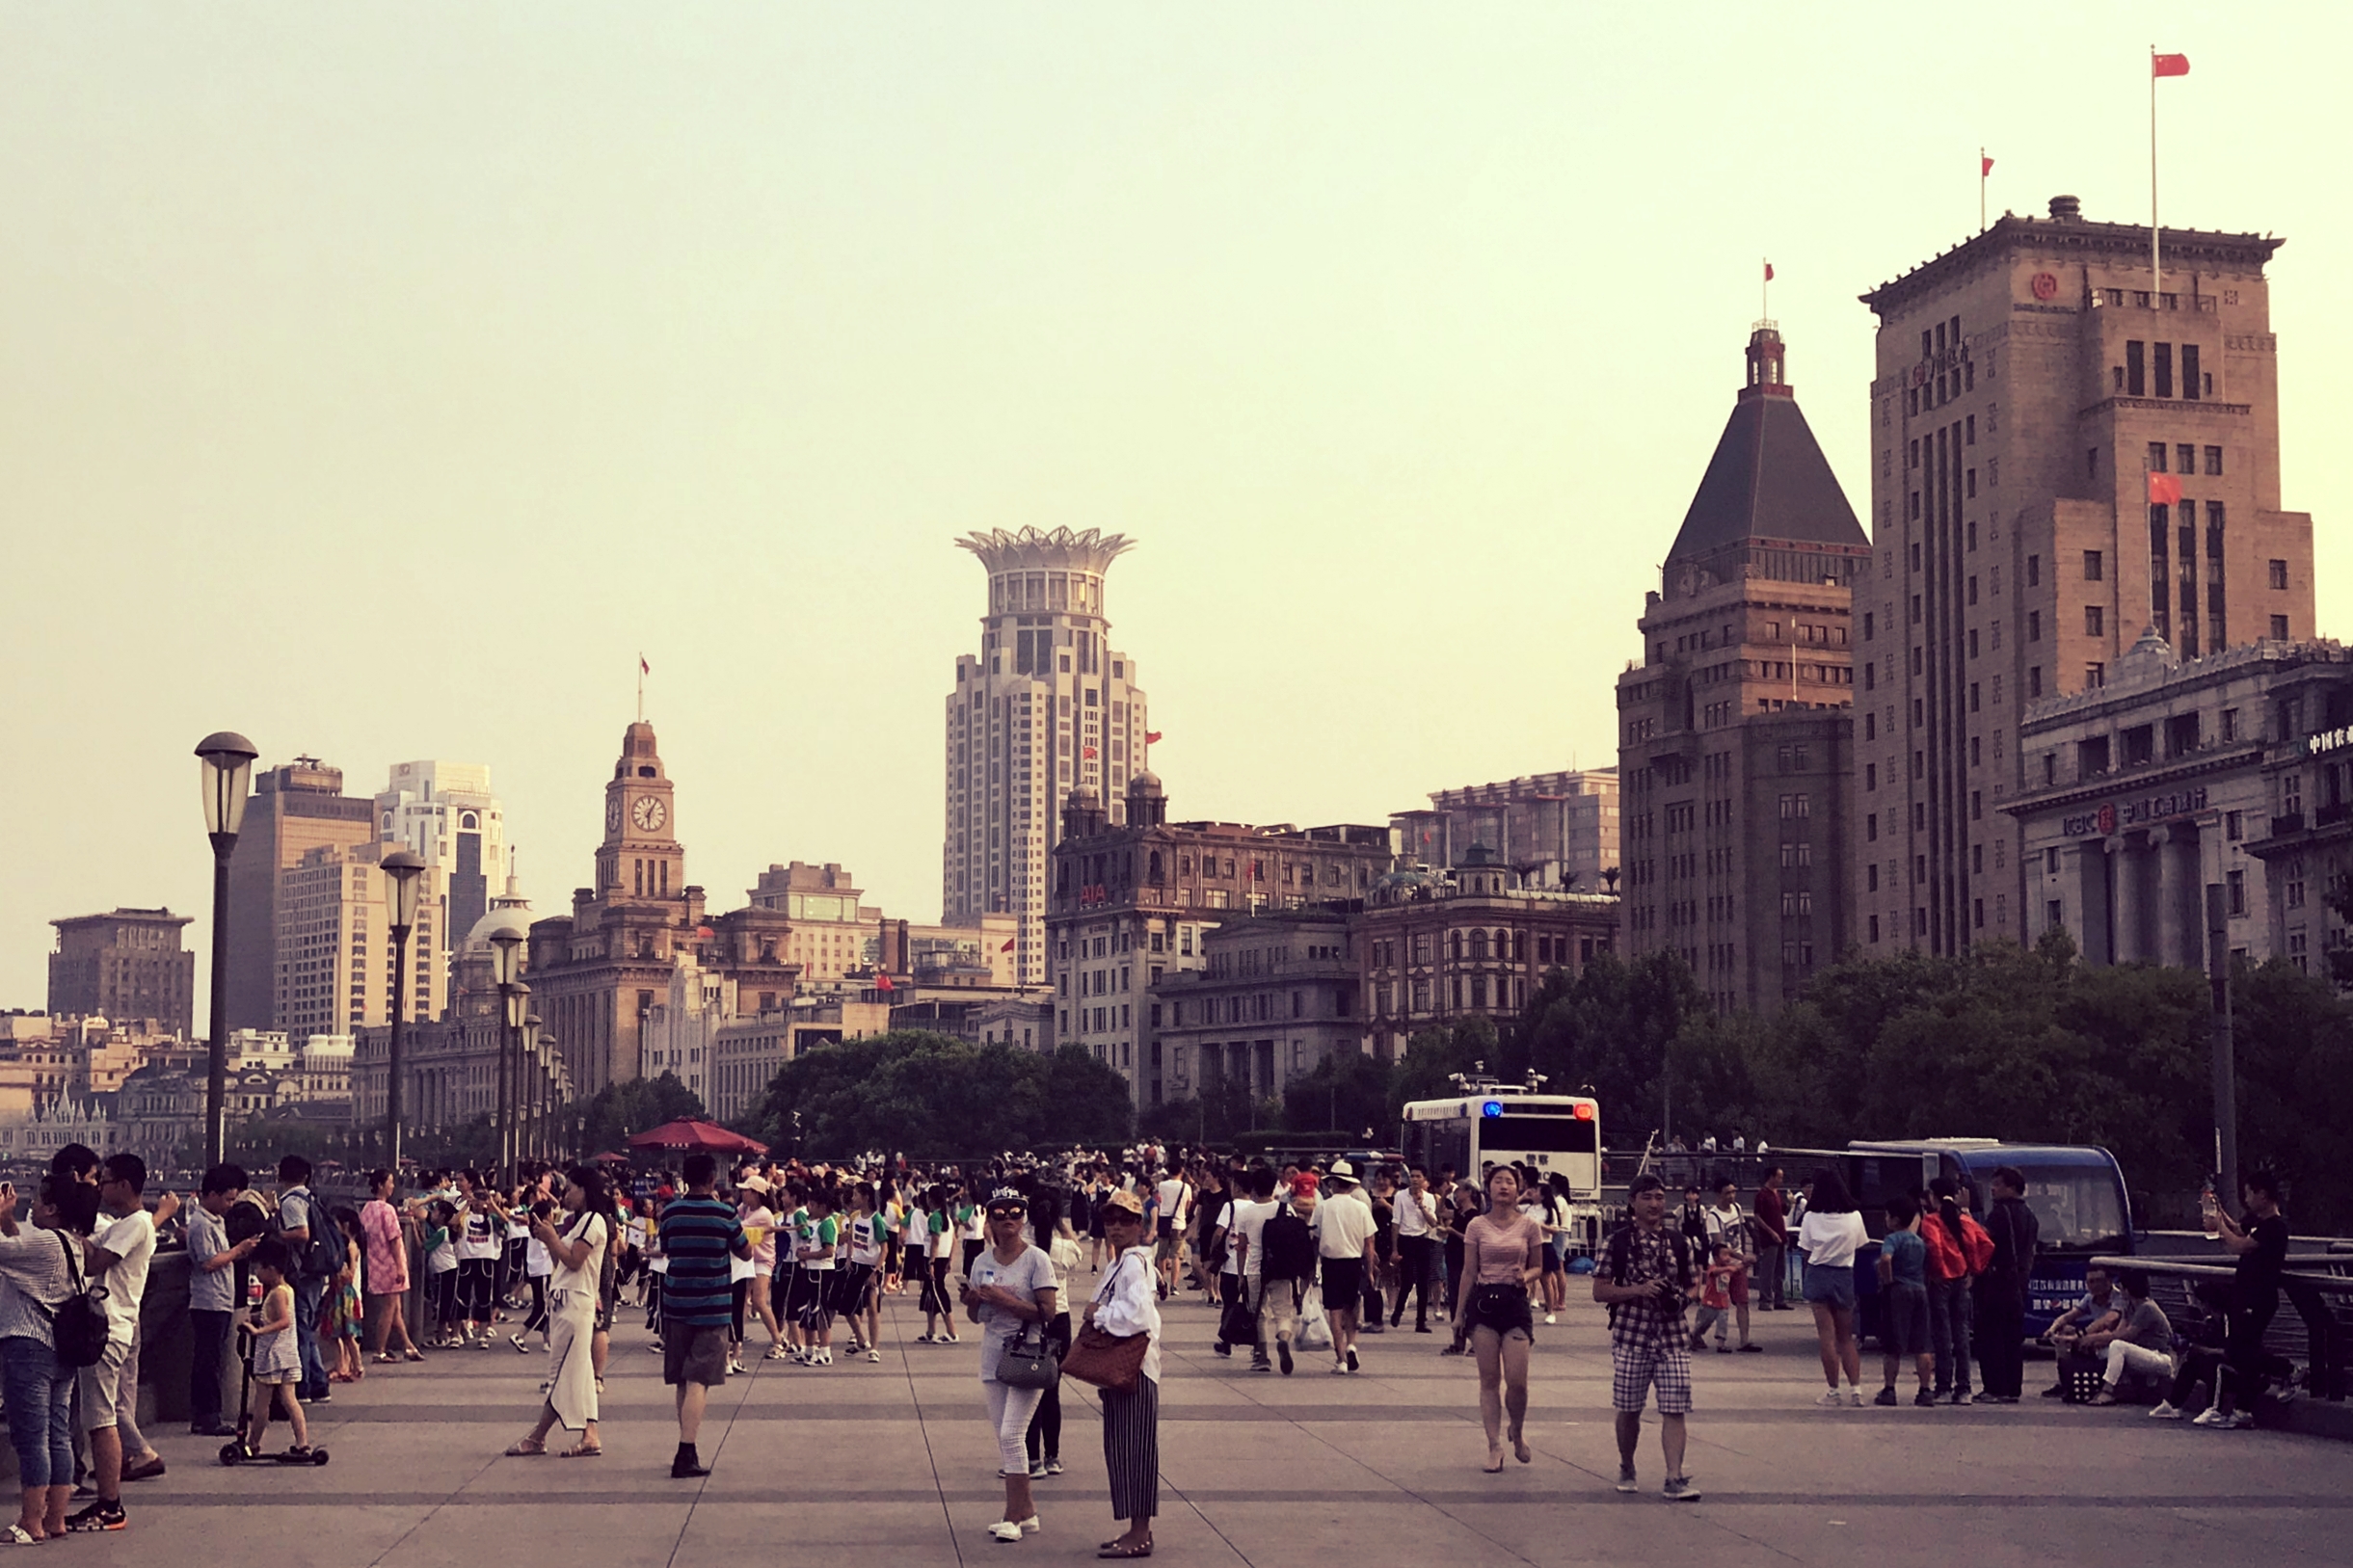 LATE AFTERNOON AT THE BUND